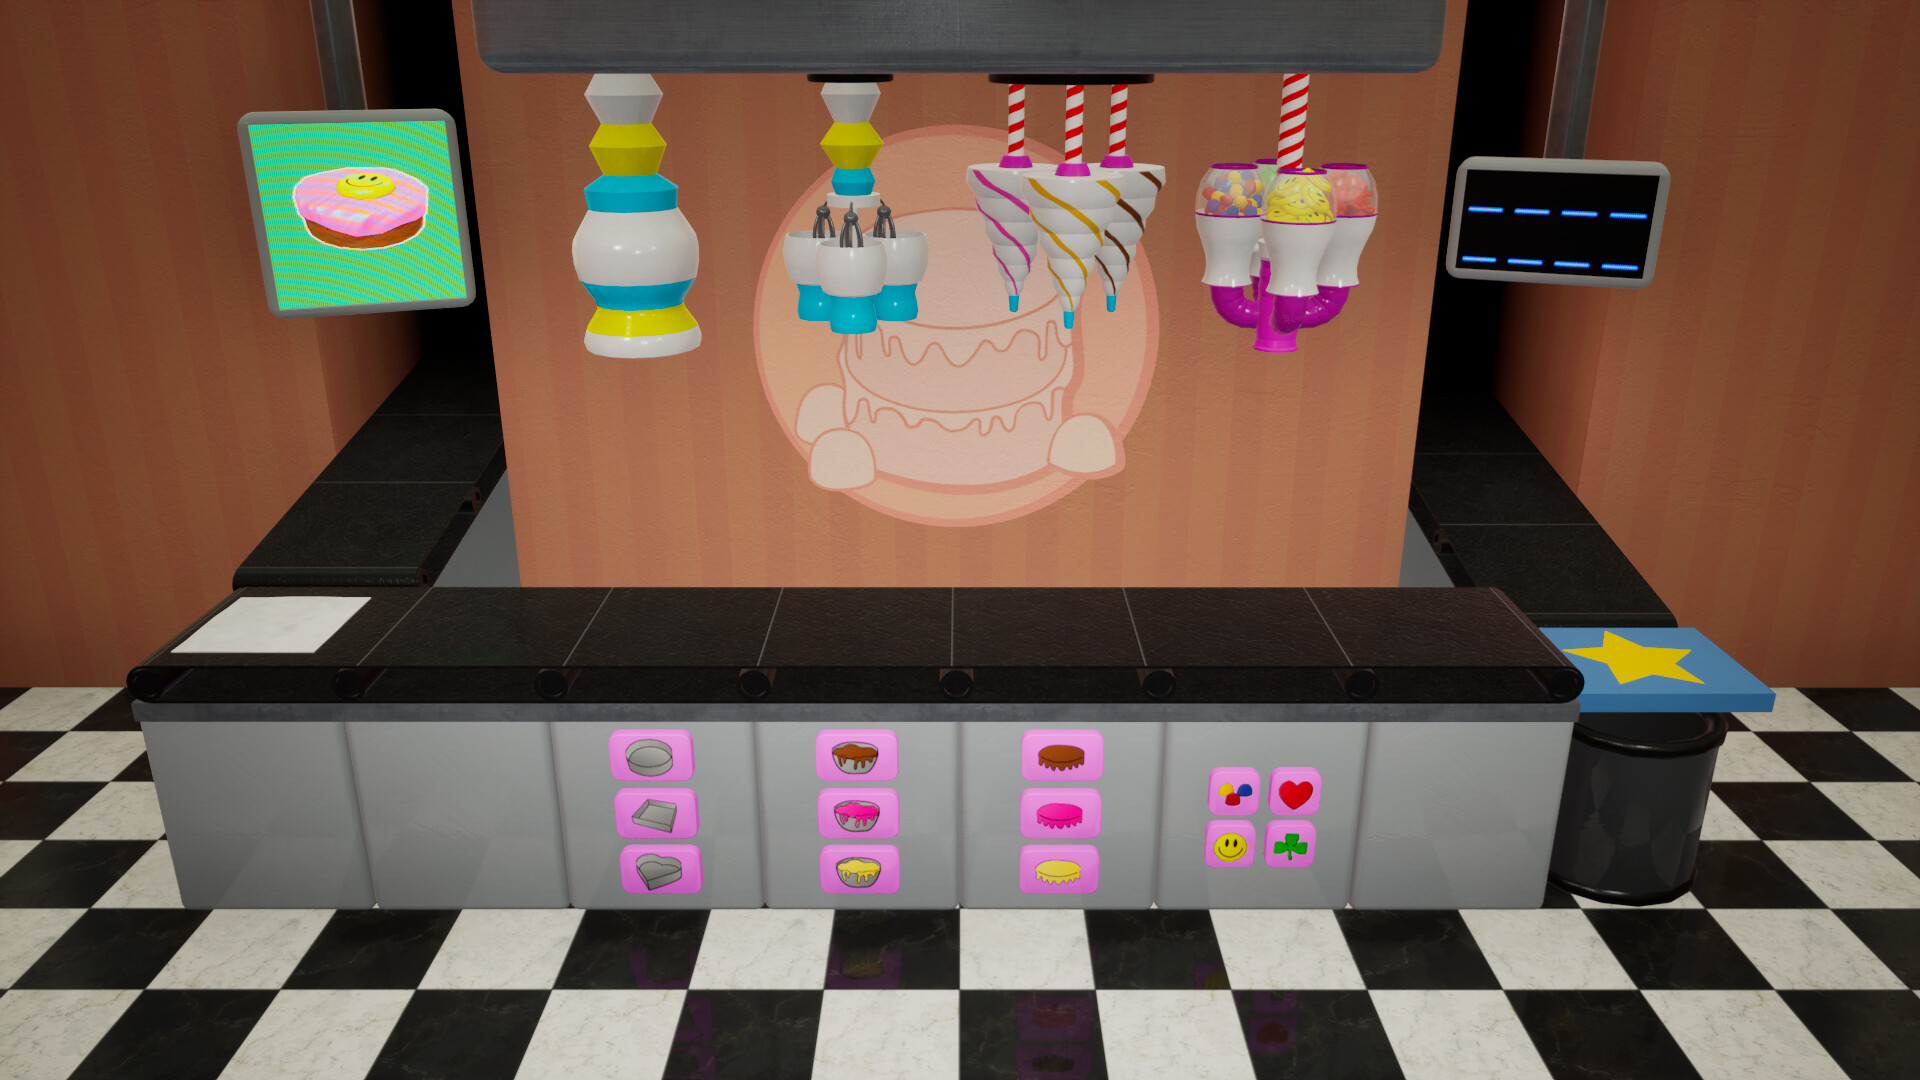 Fun 3D Cake Cooking Game My Bakery Empire Color, Decorate & Serve Cakes -  Beautiful Pink Cake - YouTube